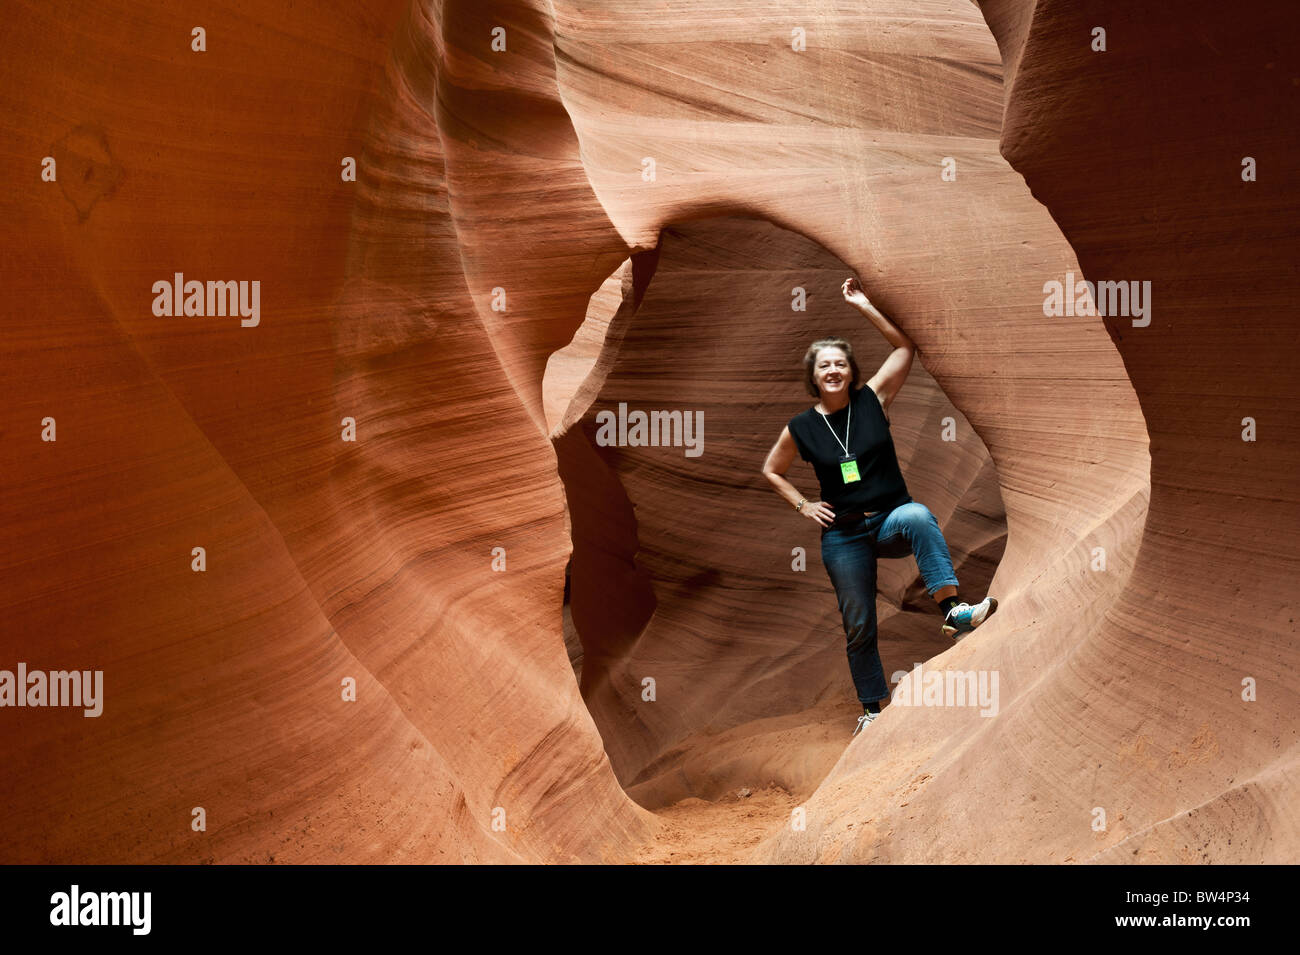 Girl posing in Lower Antelope Canyon, Arizona Page appartenant à la Nation Navajo Banque D'Images